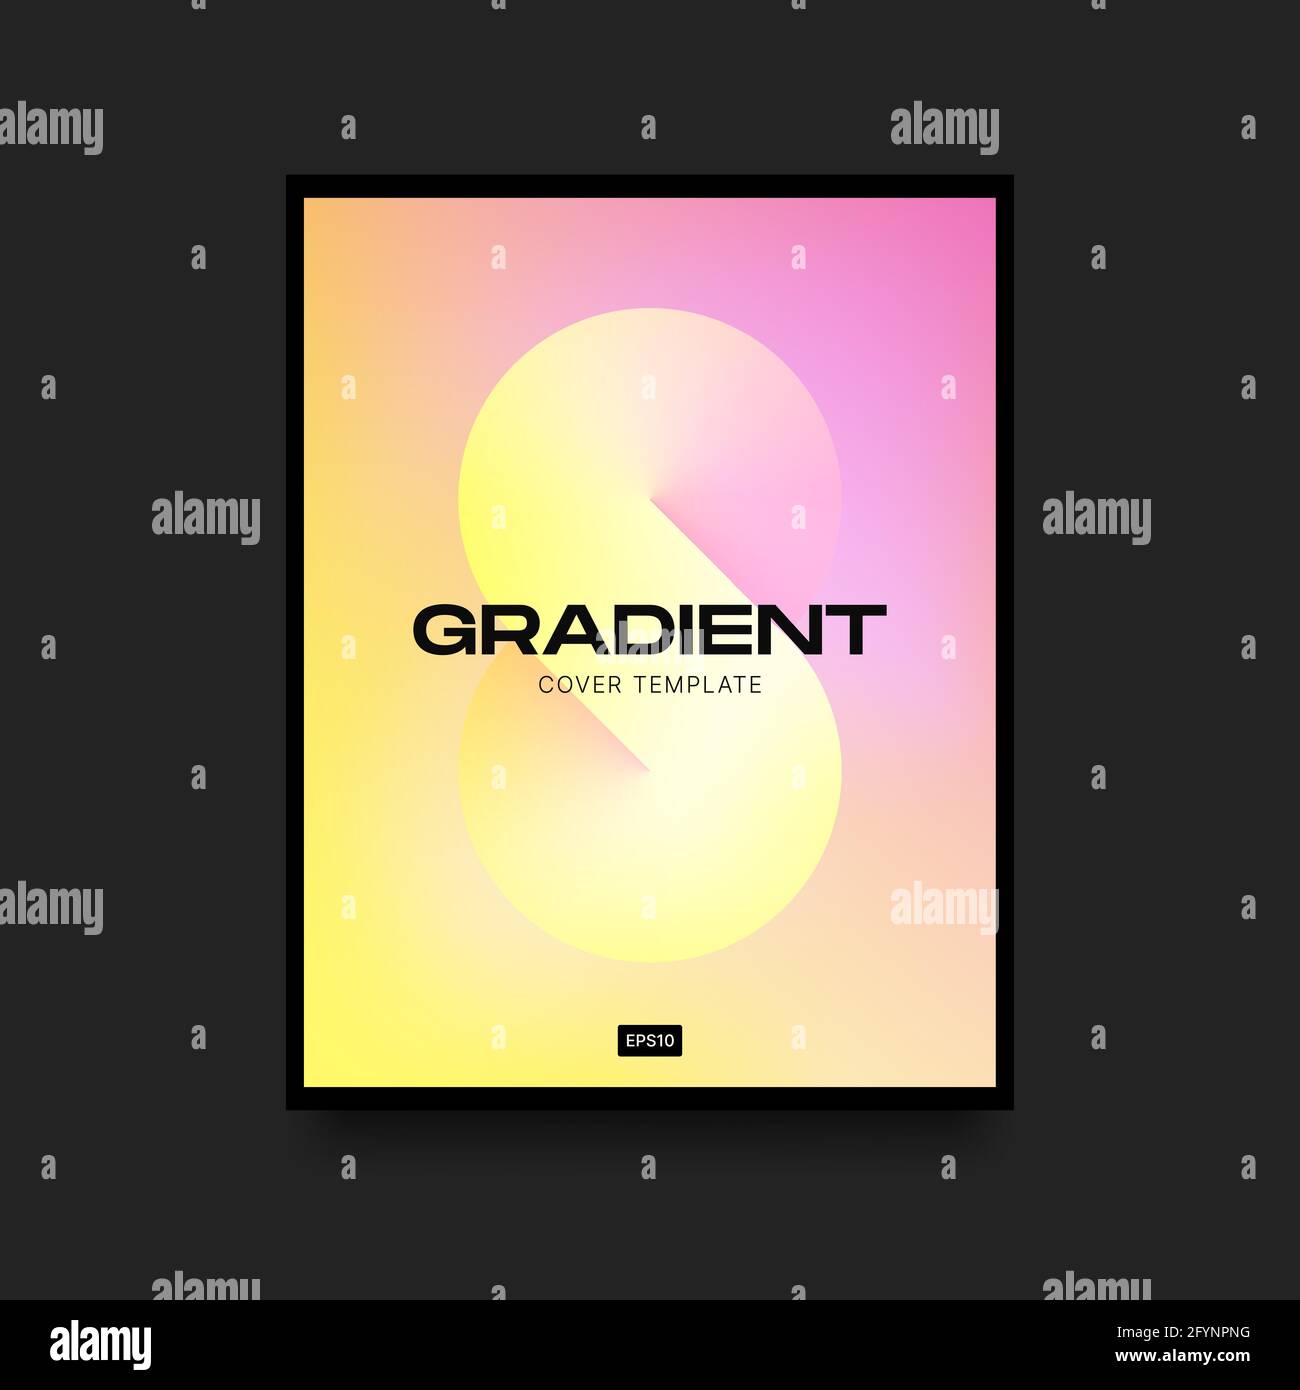 Delicate Pink and Yellow Vertical Cover. Gradient Template with Infinity Symbol. Vector illustration Stock Vector